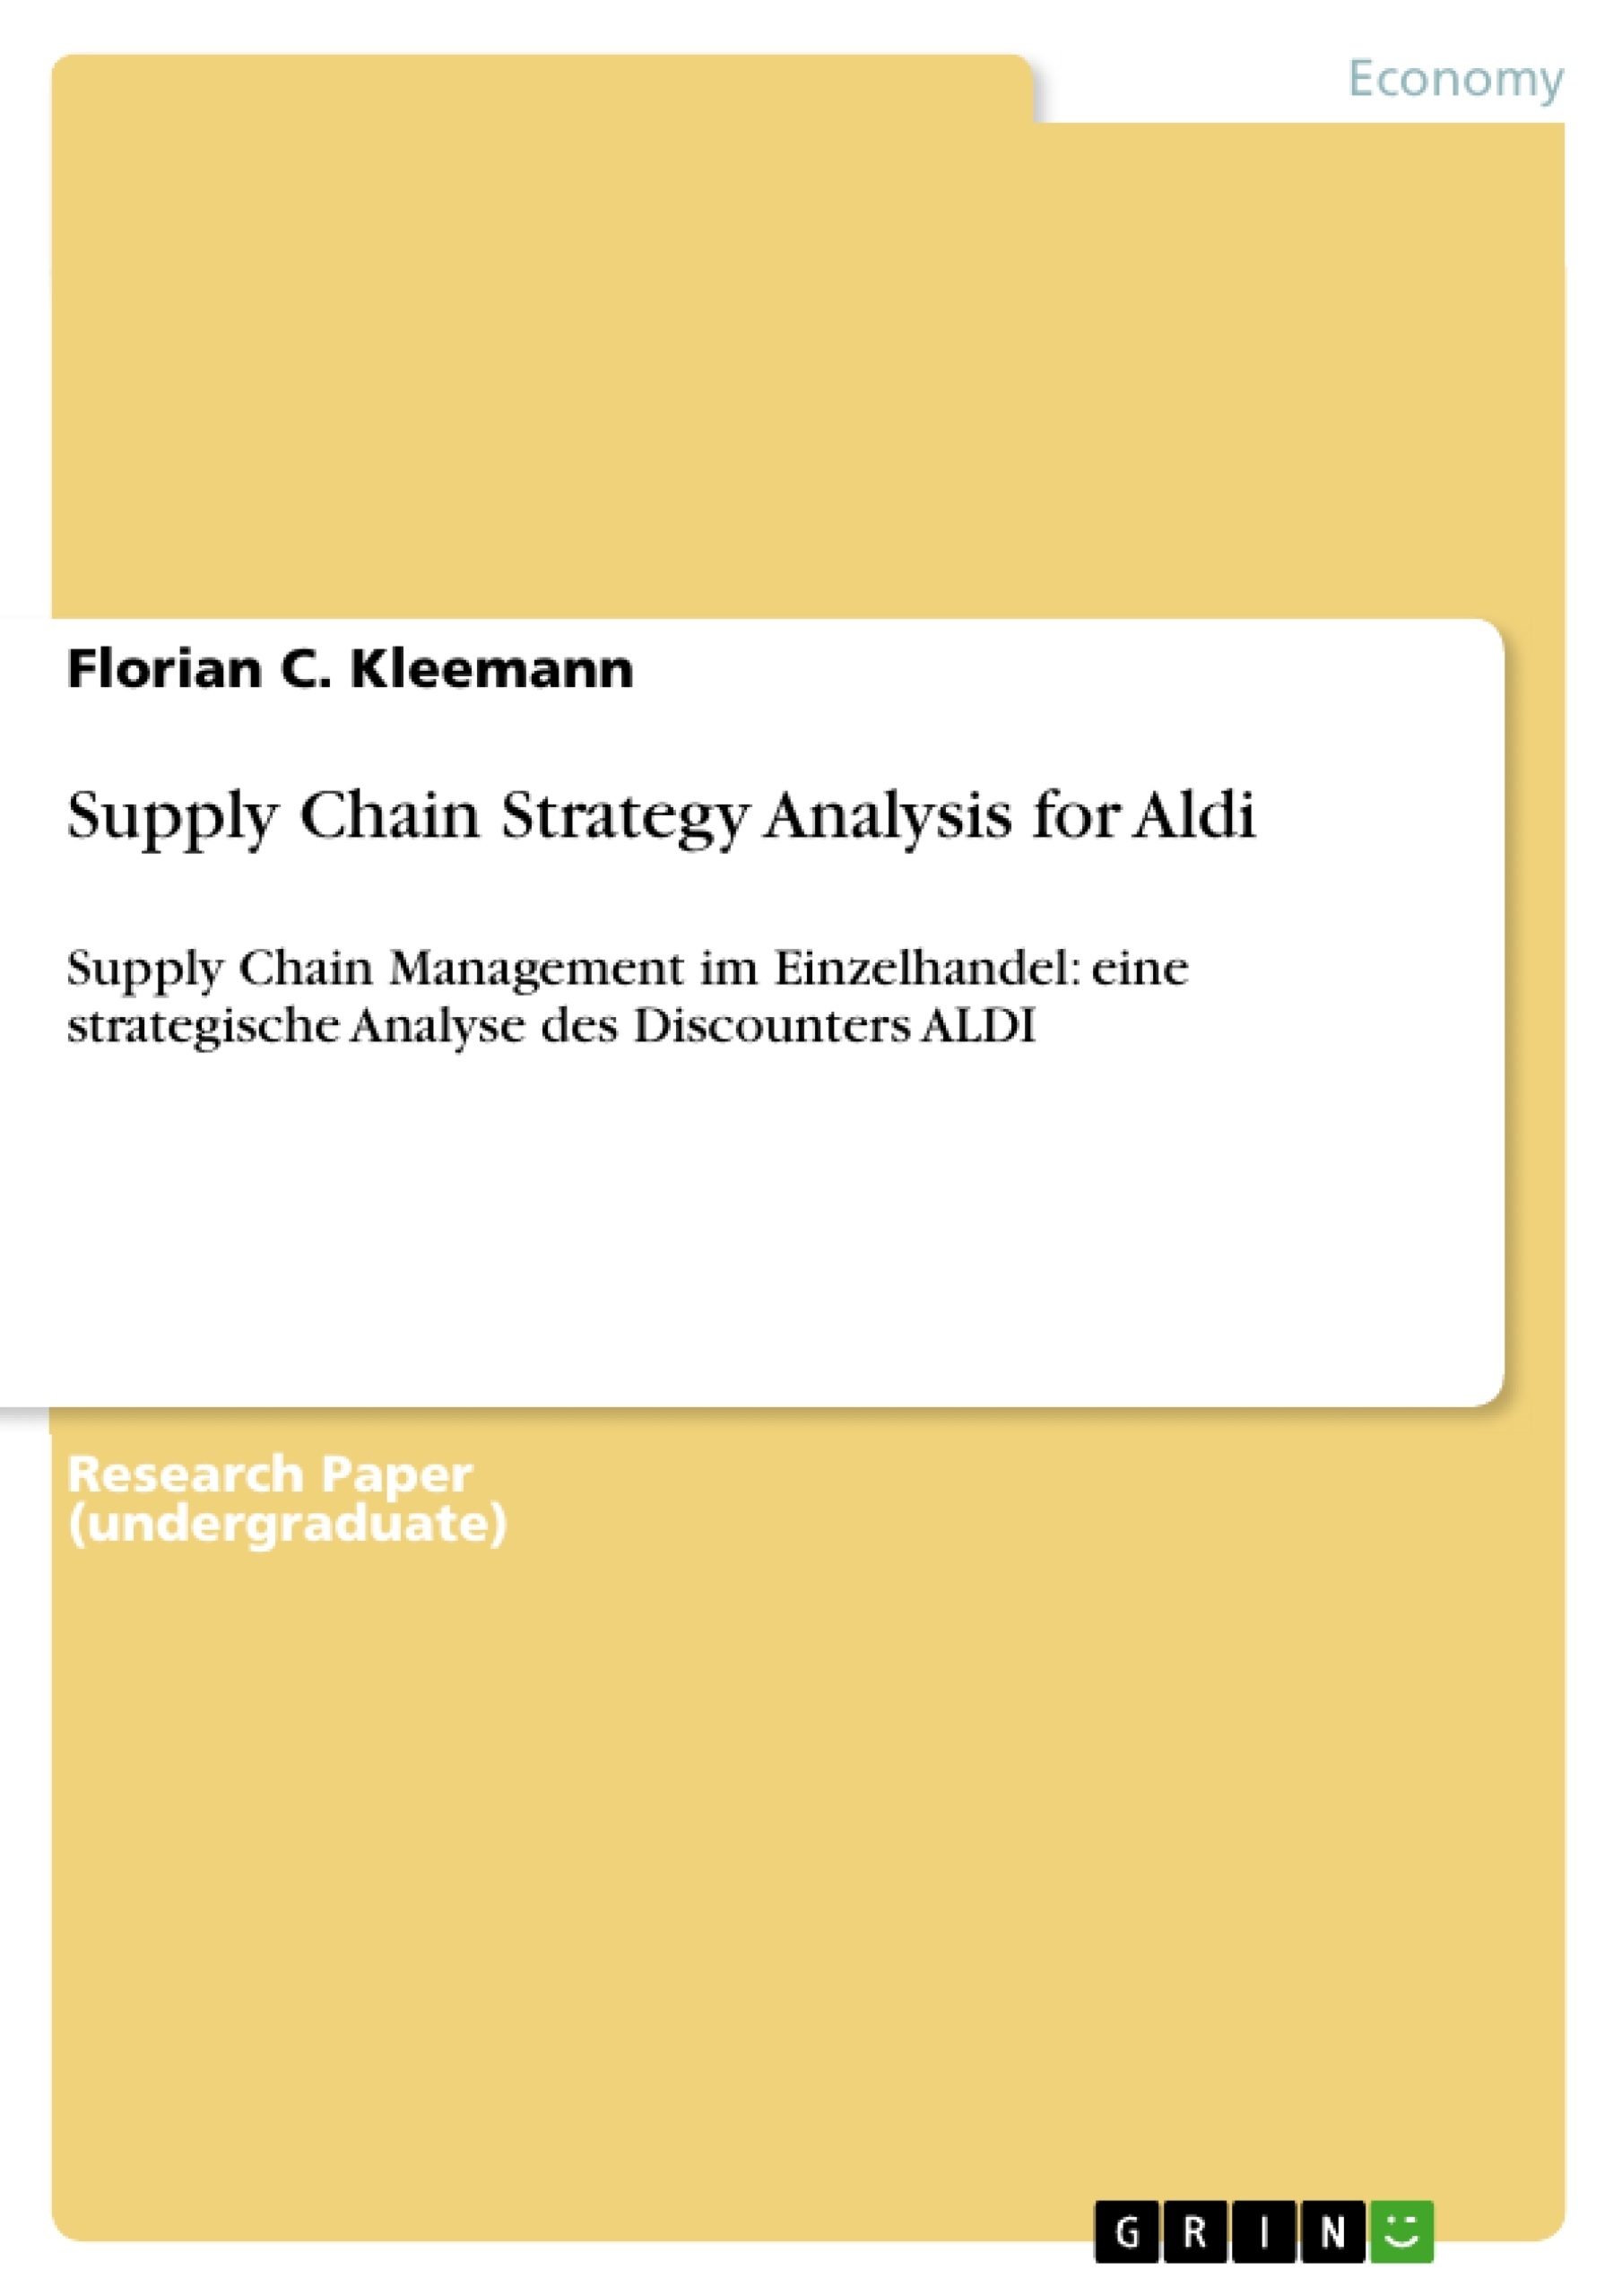 research paper on supply chain management